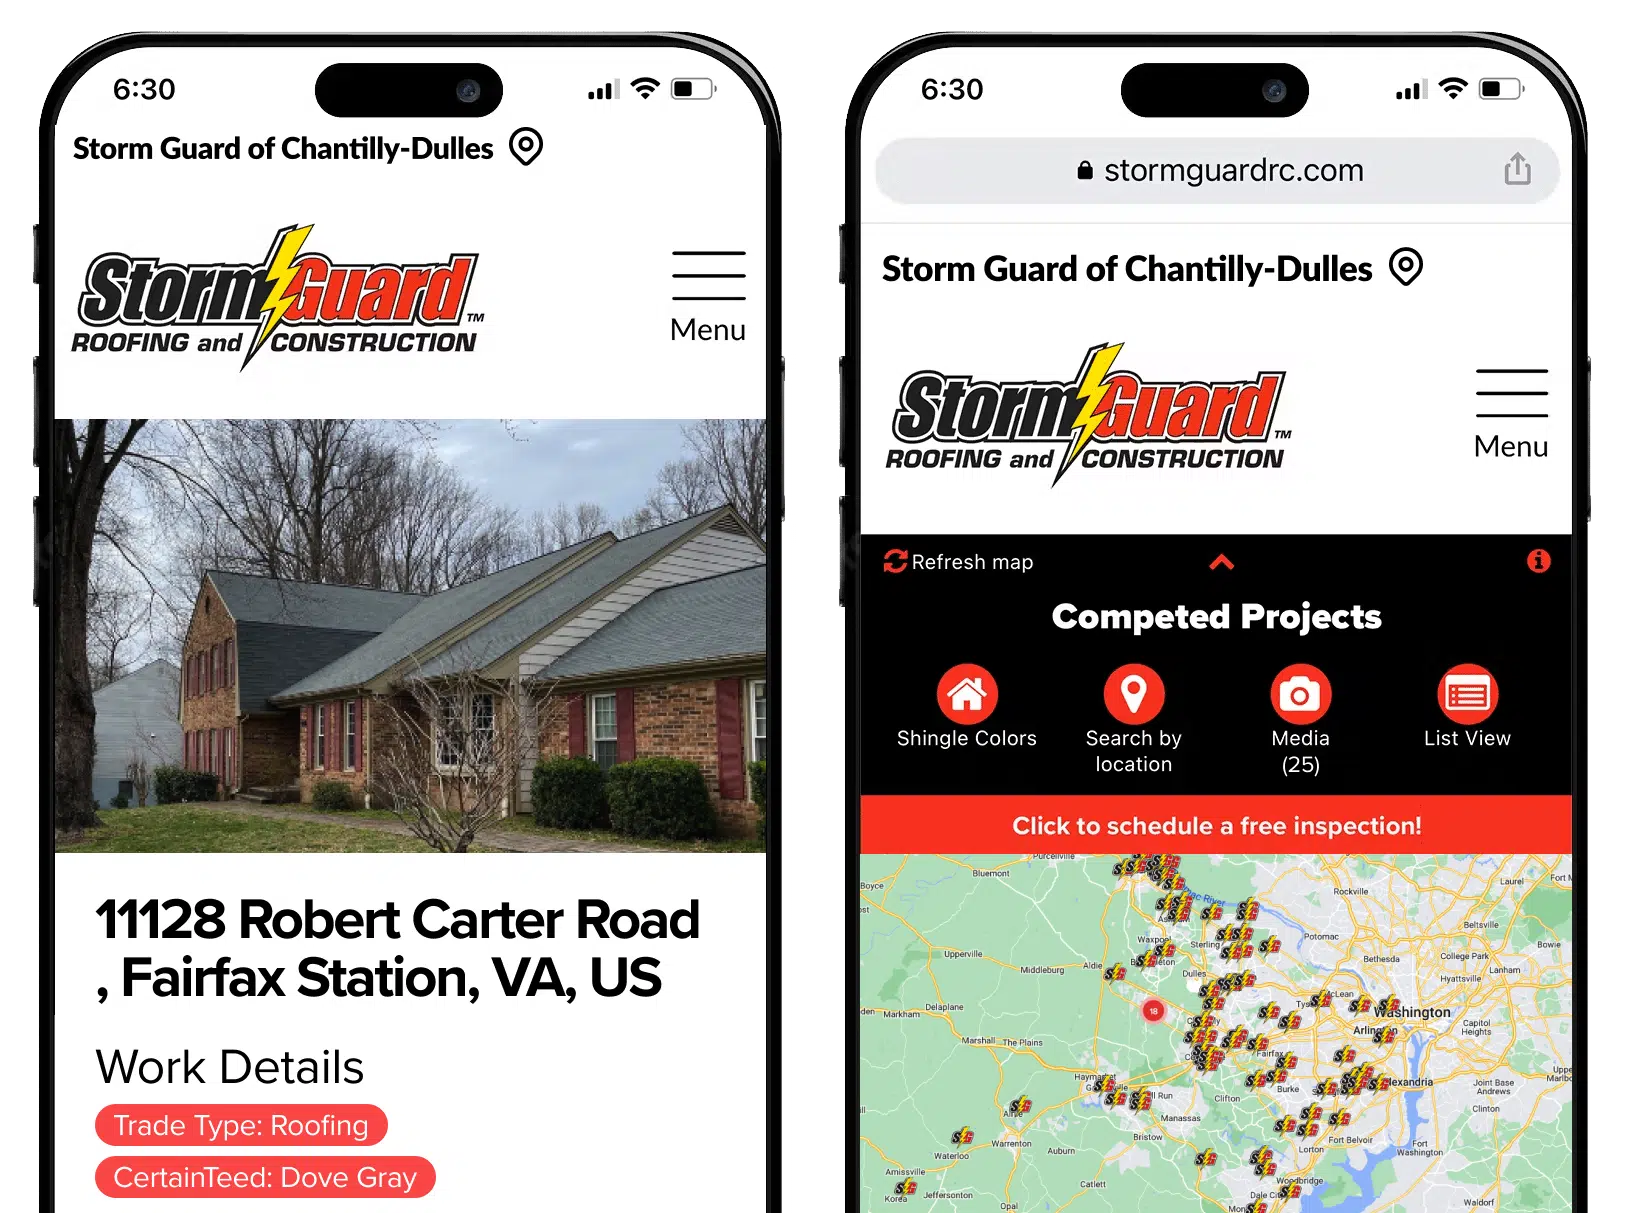 Storm Guard of Chantilly-Dulles roofing projects sample